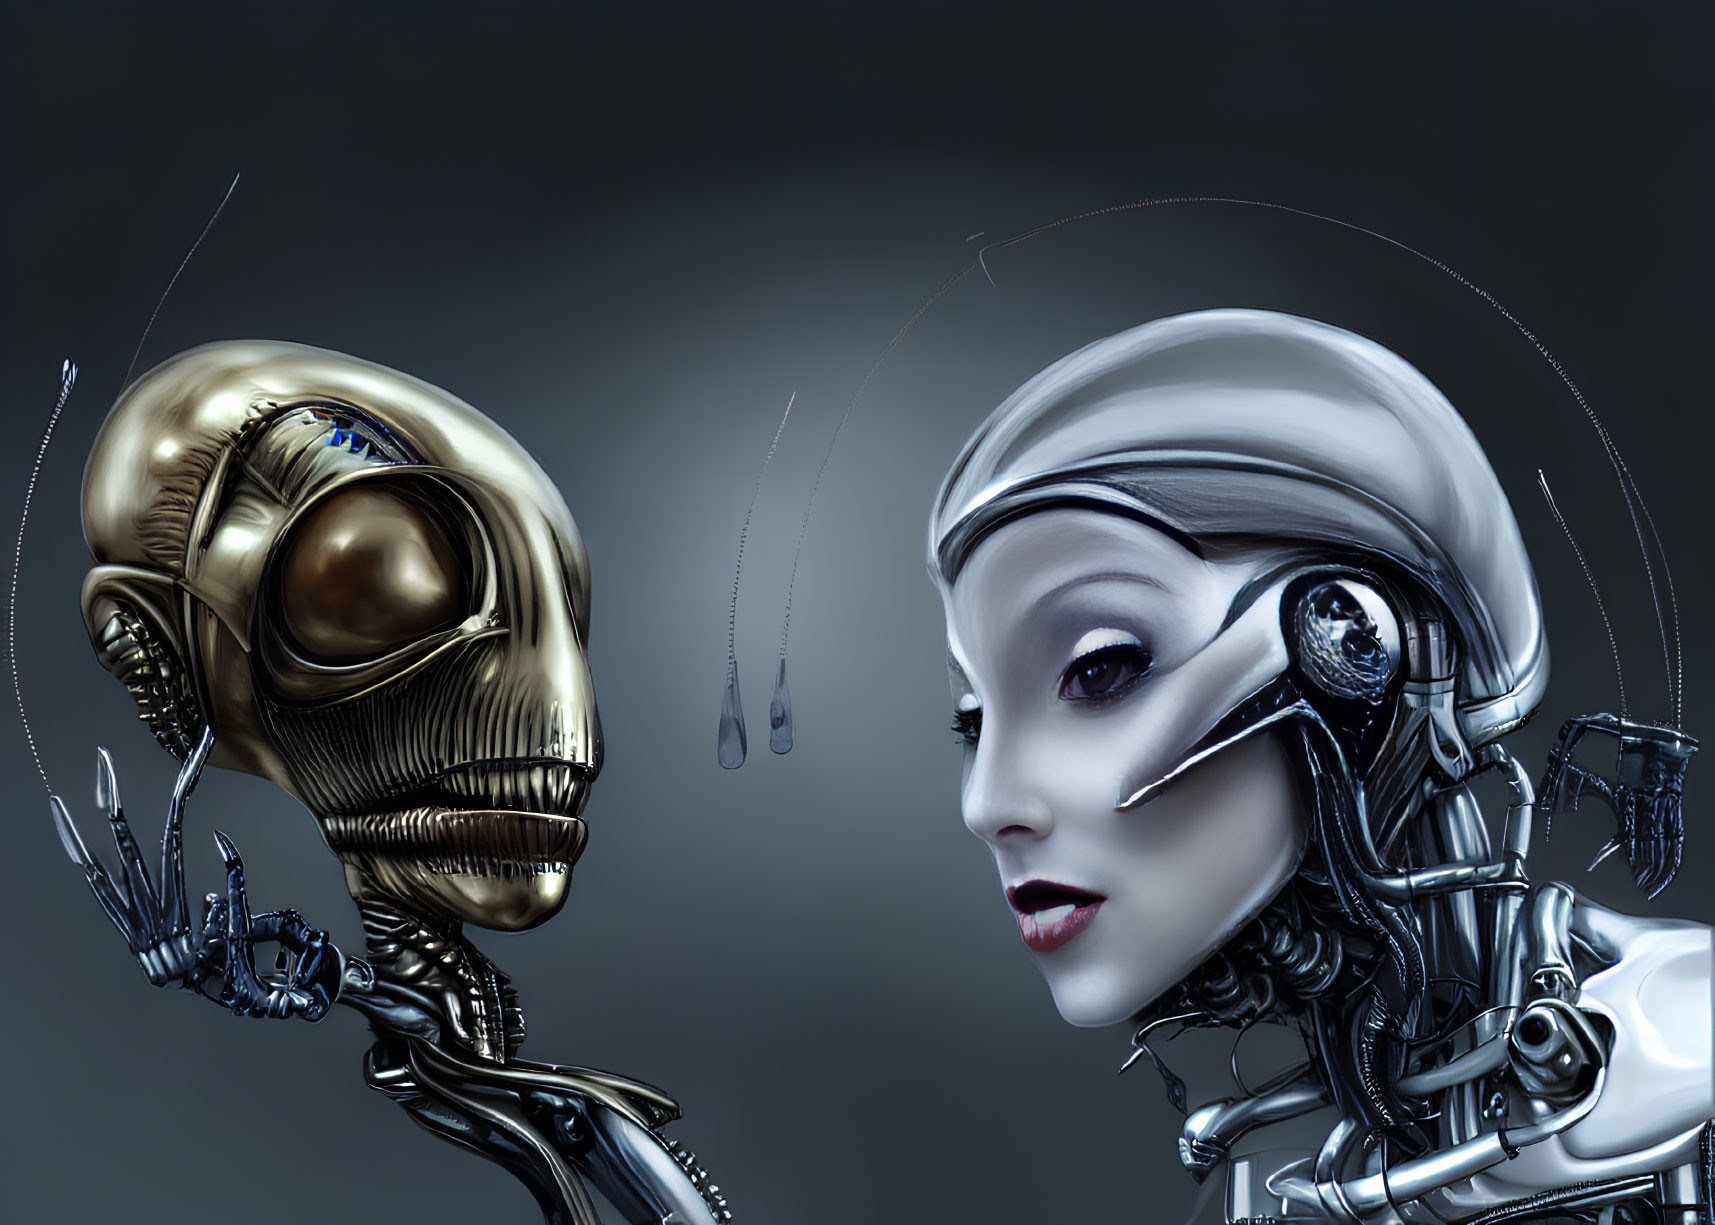 Detailed Digital Art: Gold and Silver Robotic Heads Facing Each Other